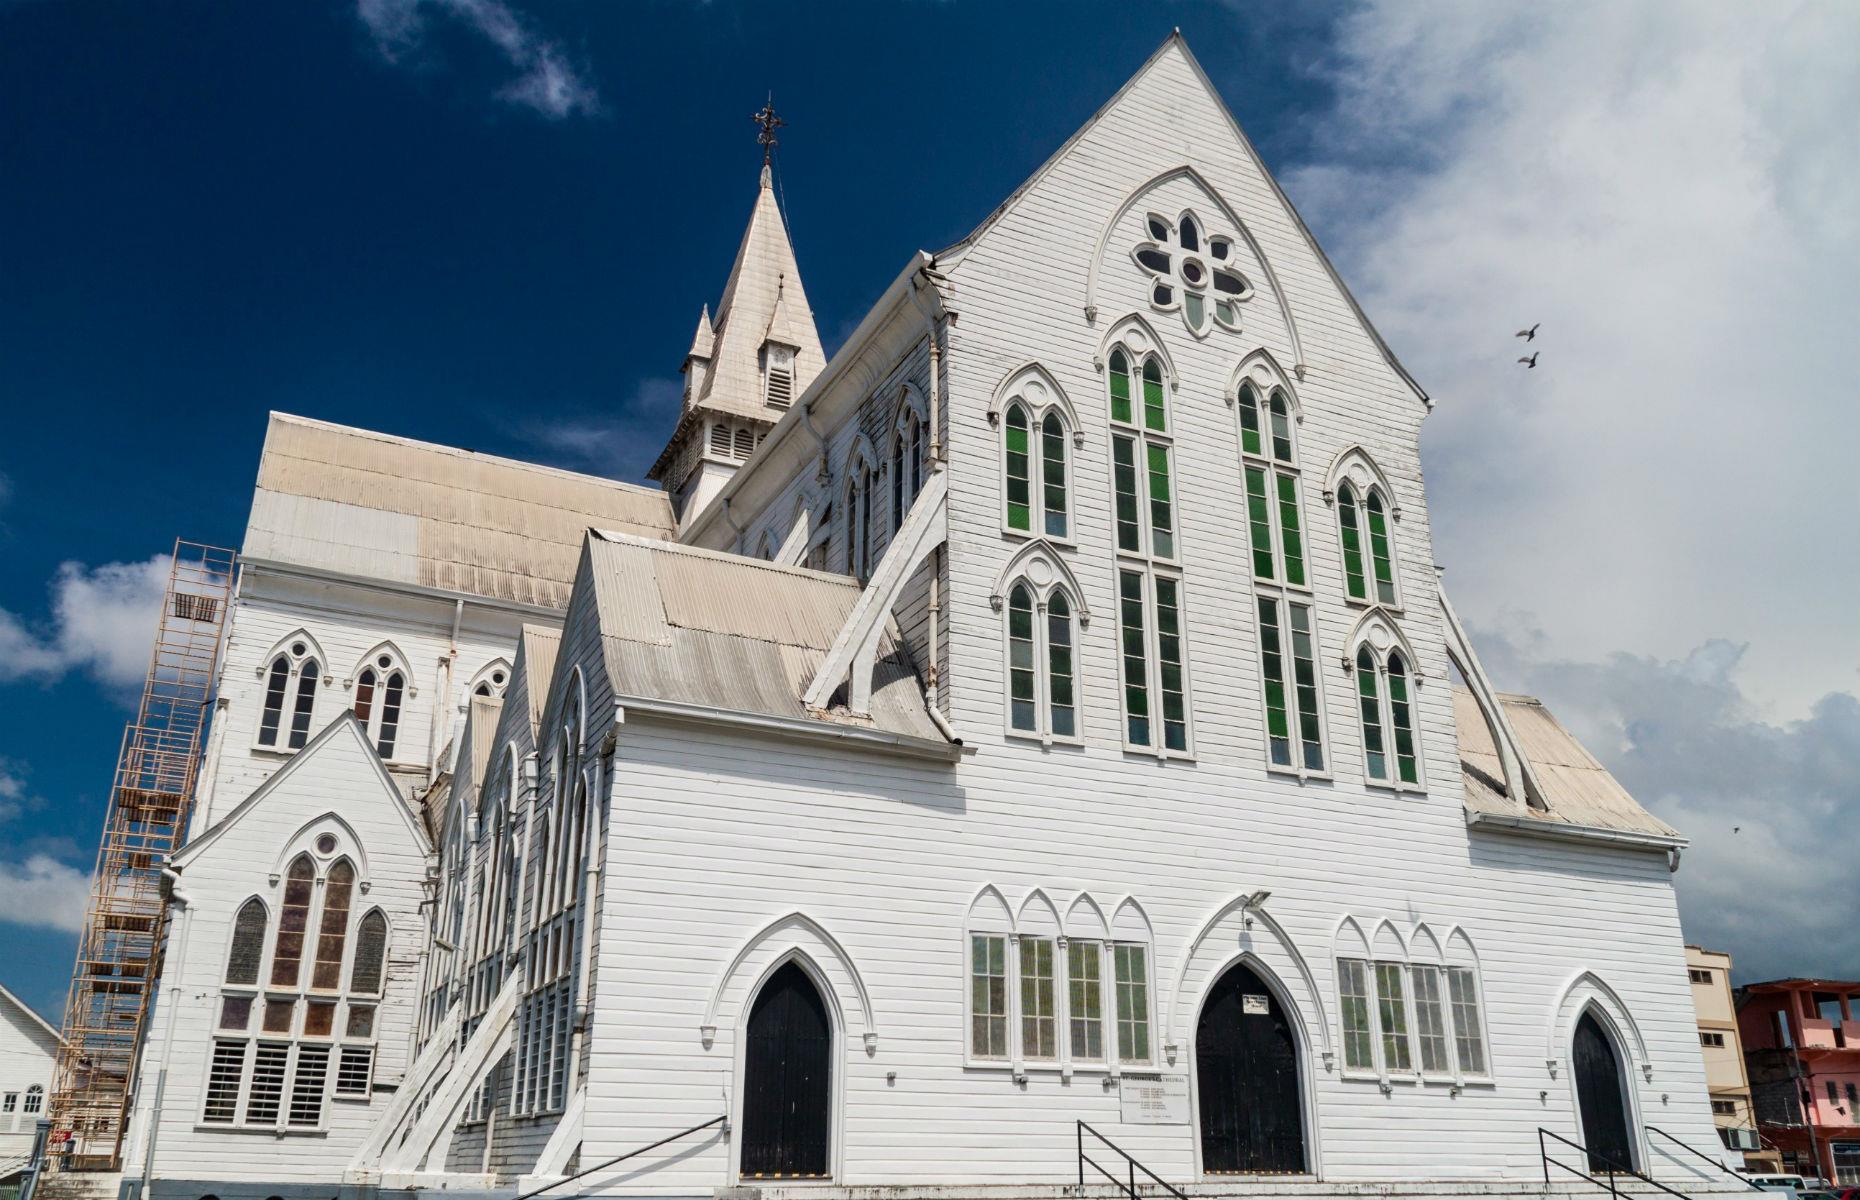 <p>Said to be one of the tallest wooden structures in the world, St George's Cathedral in Georgetown is one of Guyana’s most impressive buildings. The Gothic-style cathedral is built entirely of timber apart from the foundation walls and stands at just over 140 feet high.</p>